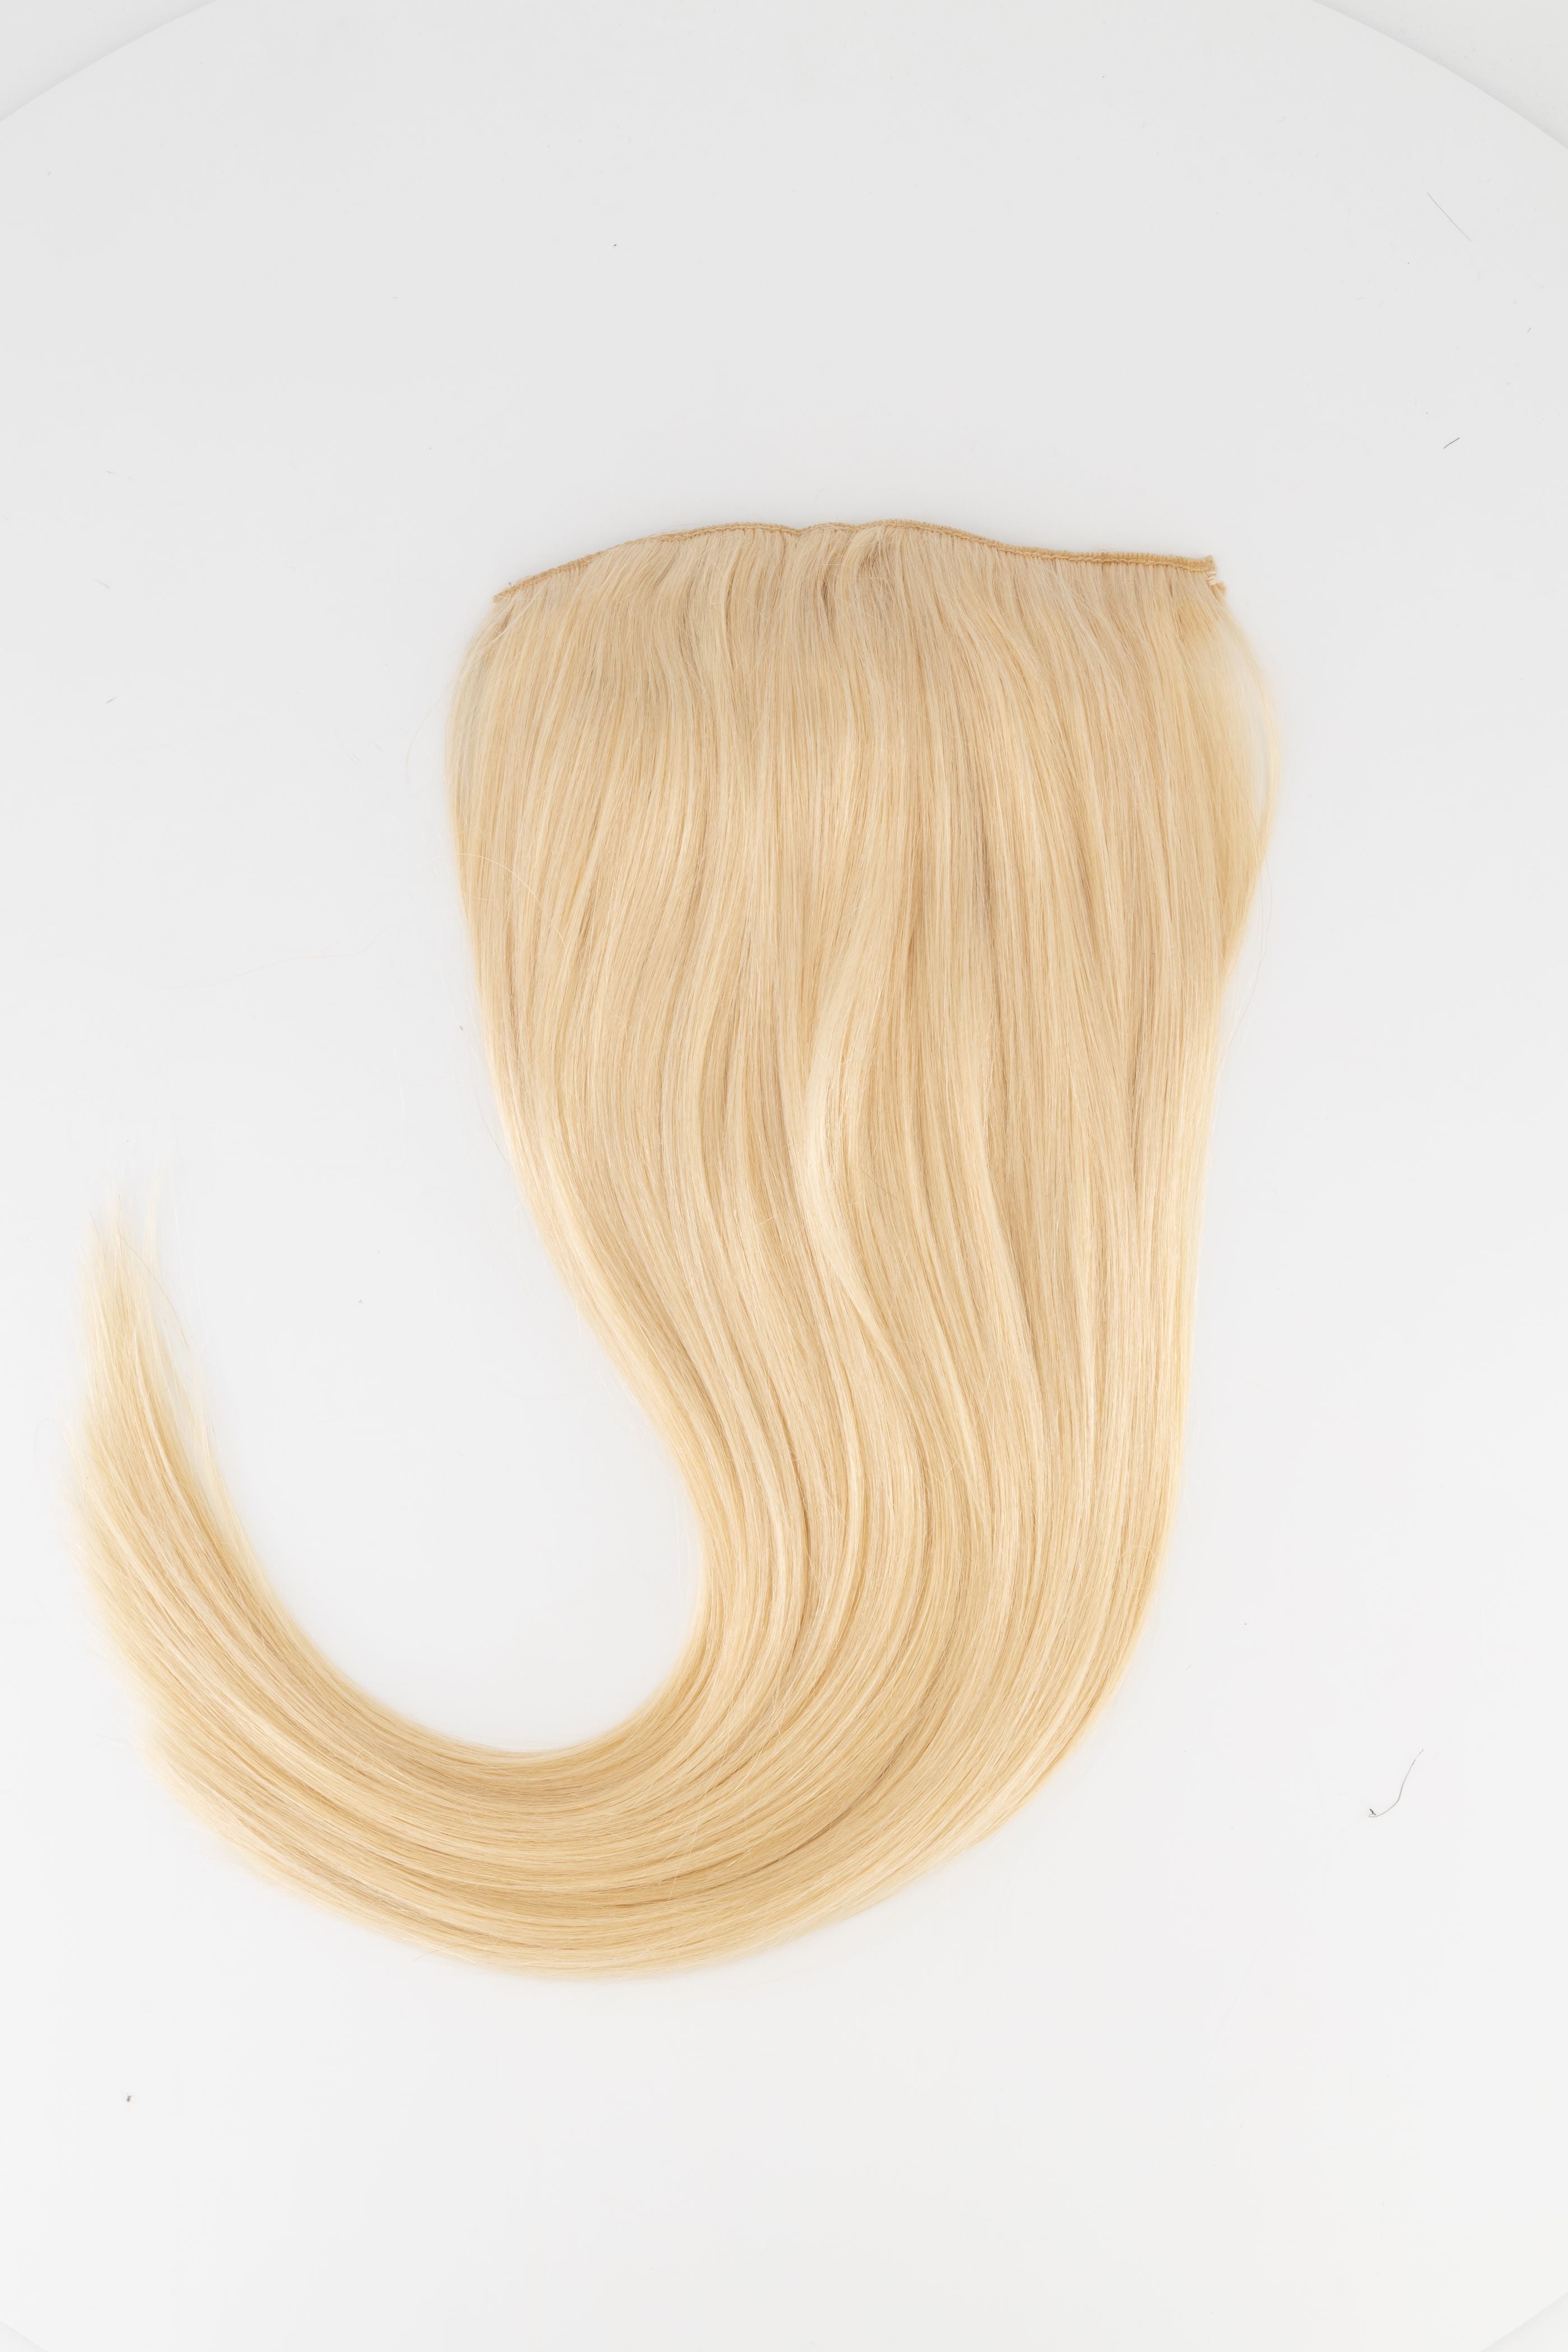 Frontrow set of clip-in hair extensions in light blonde